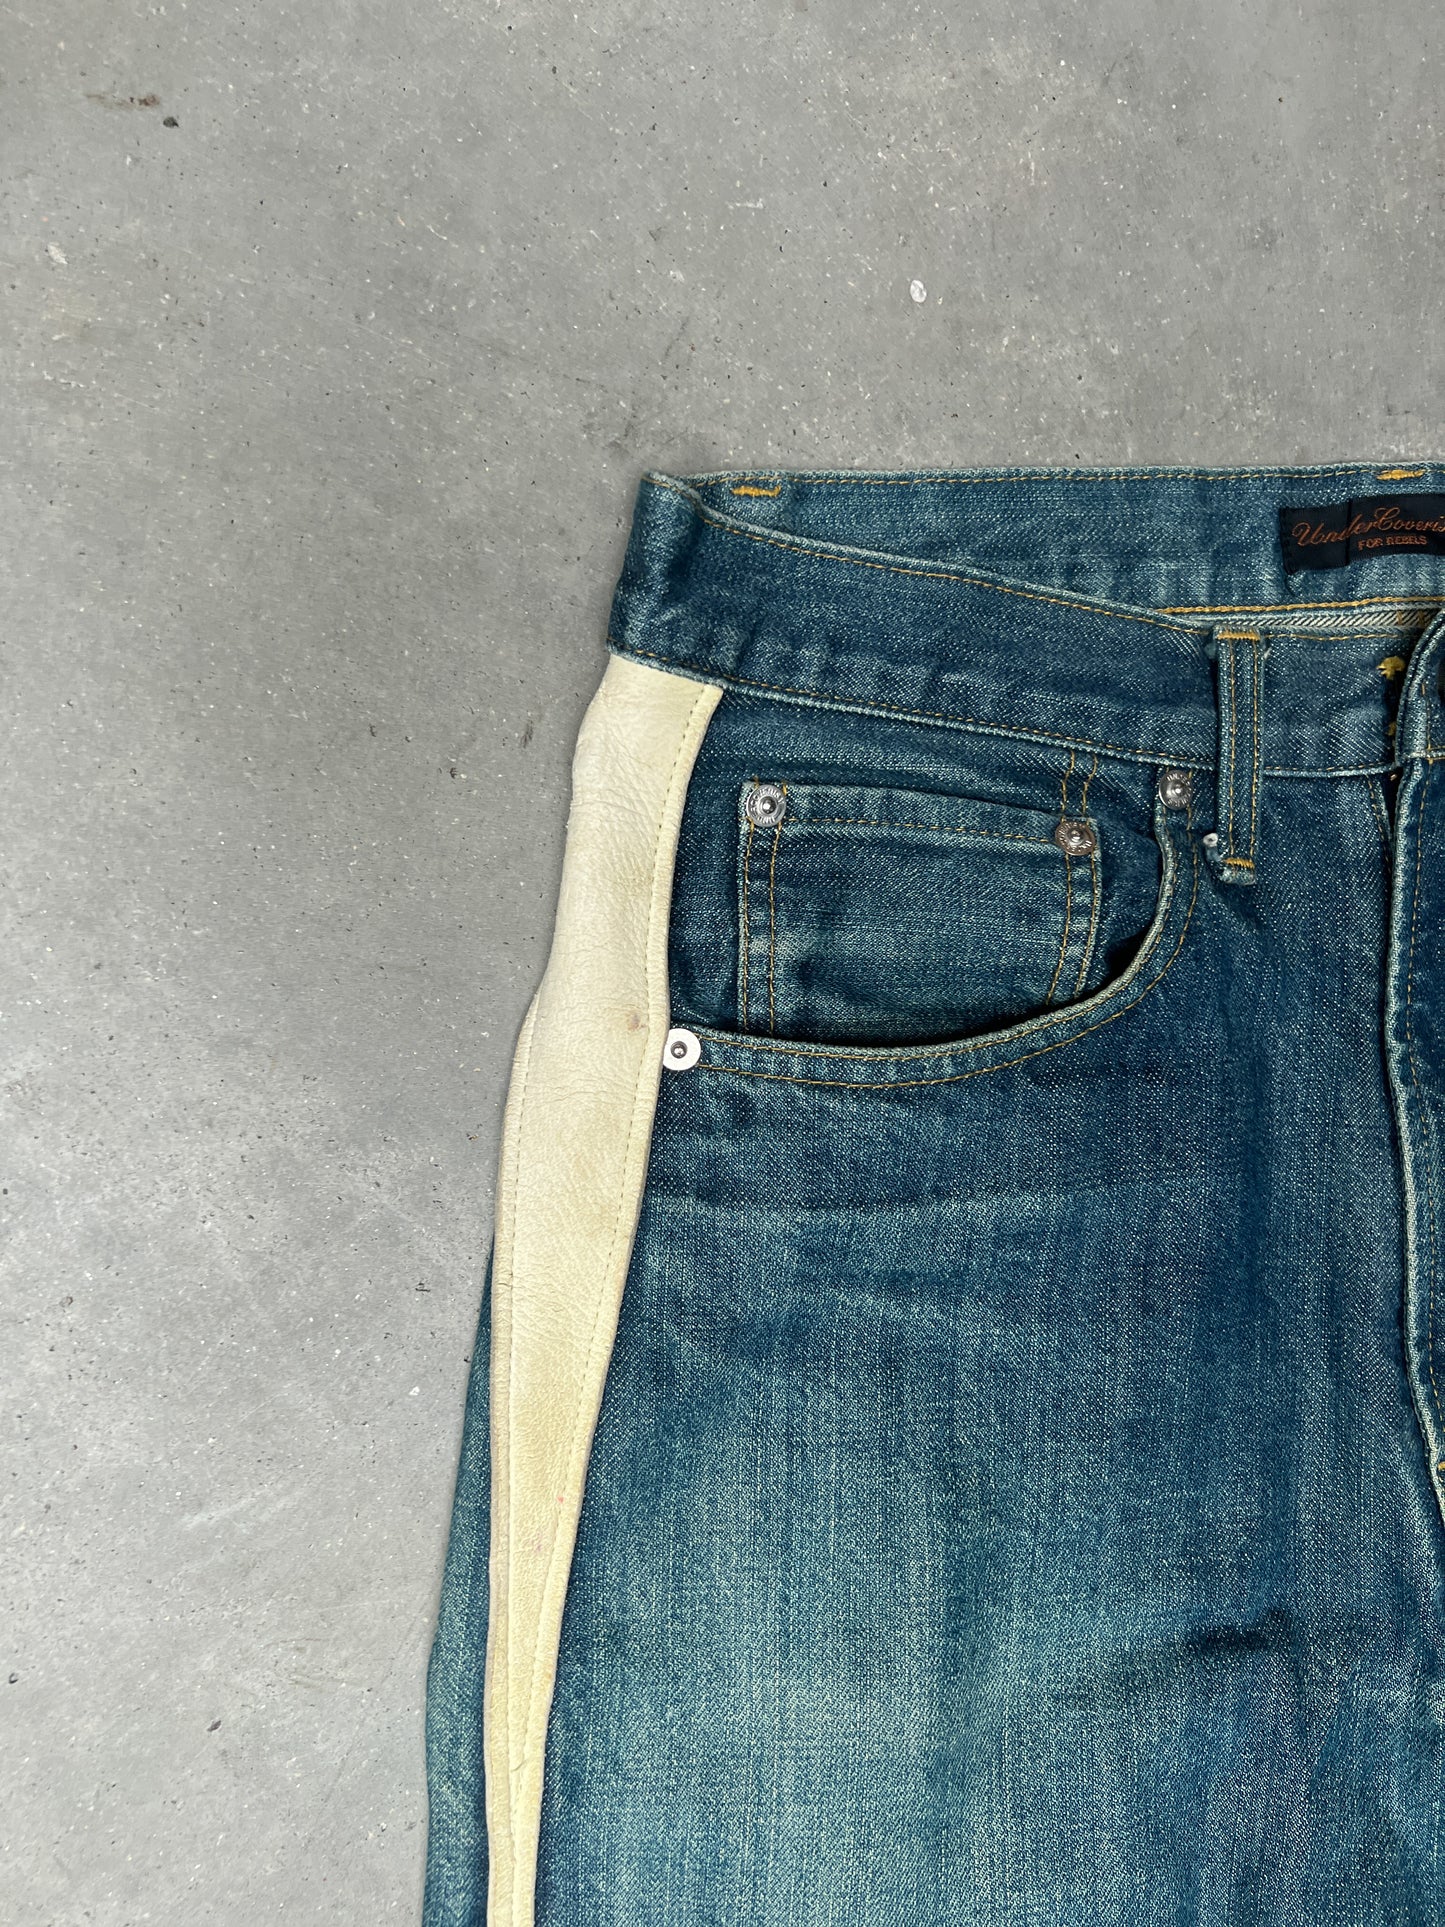 Undercover x Fragment AW02 Leather Side Stripe Denim Jeans